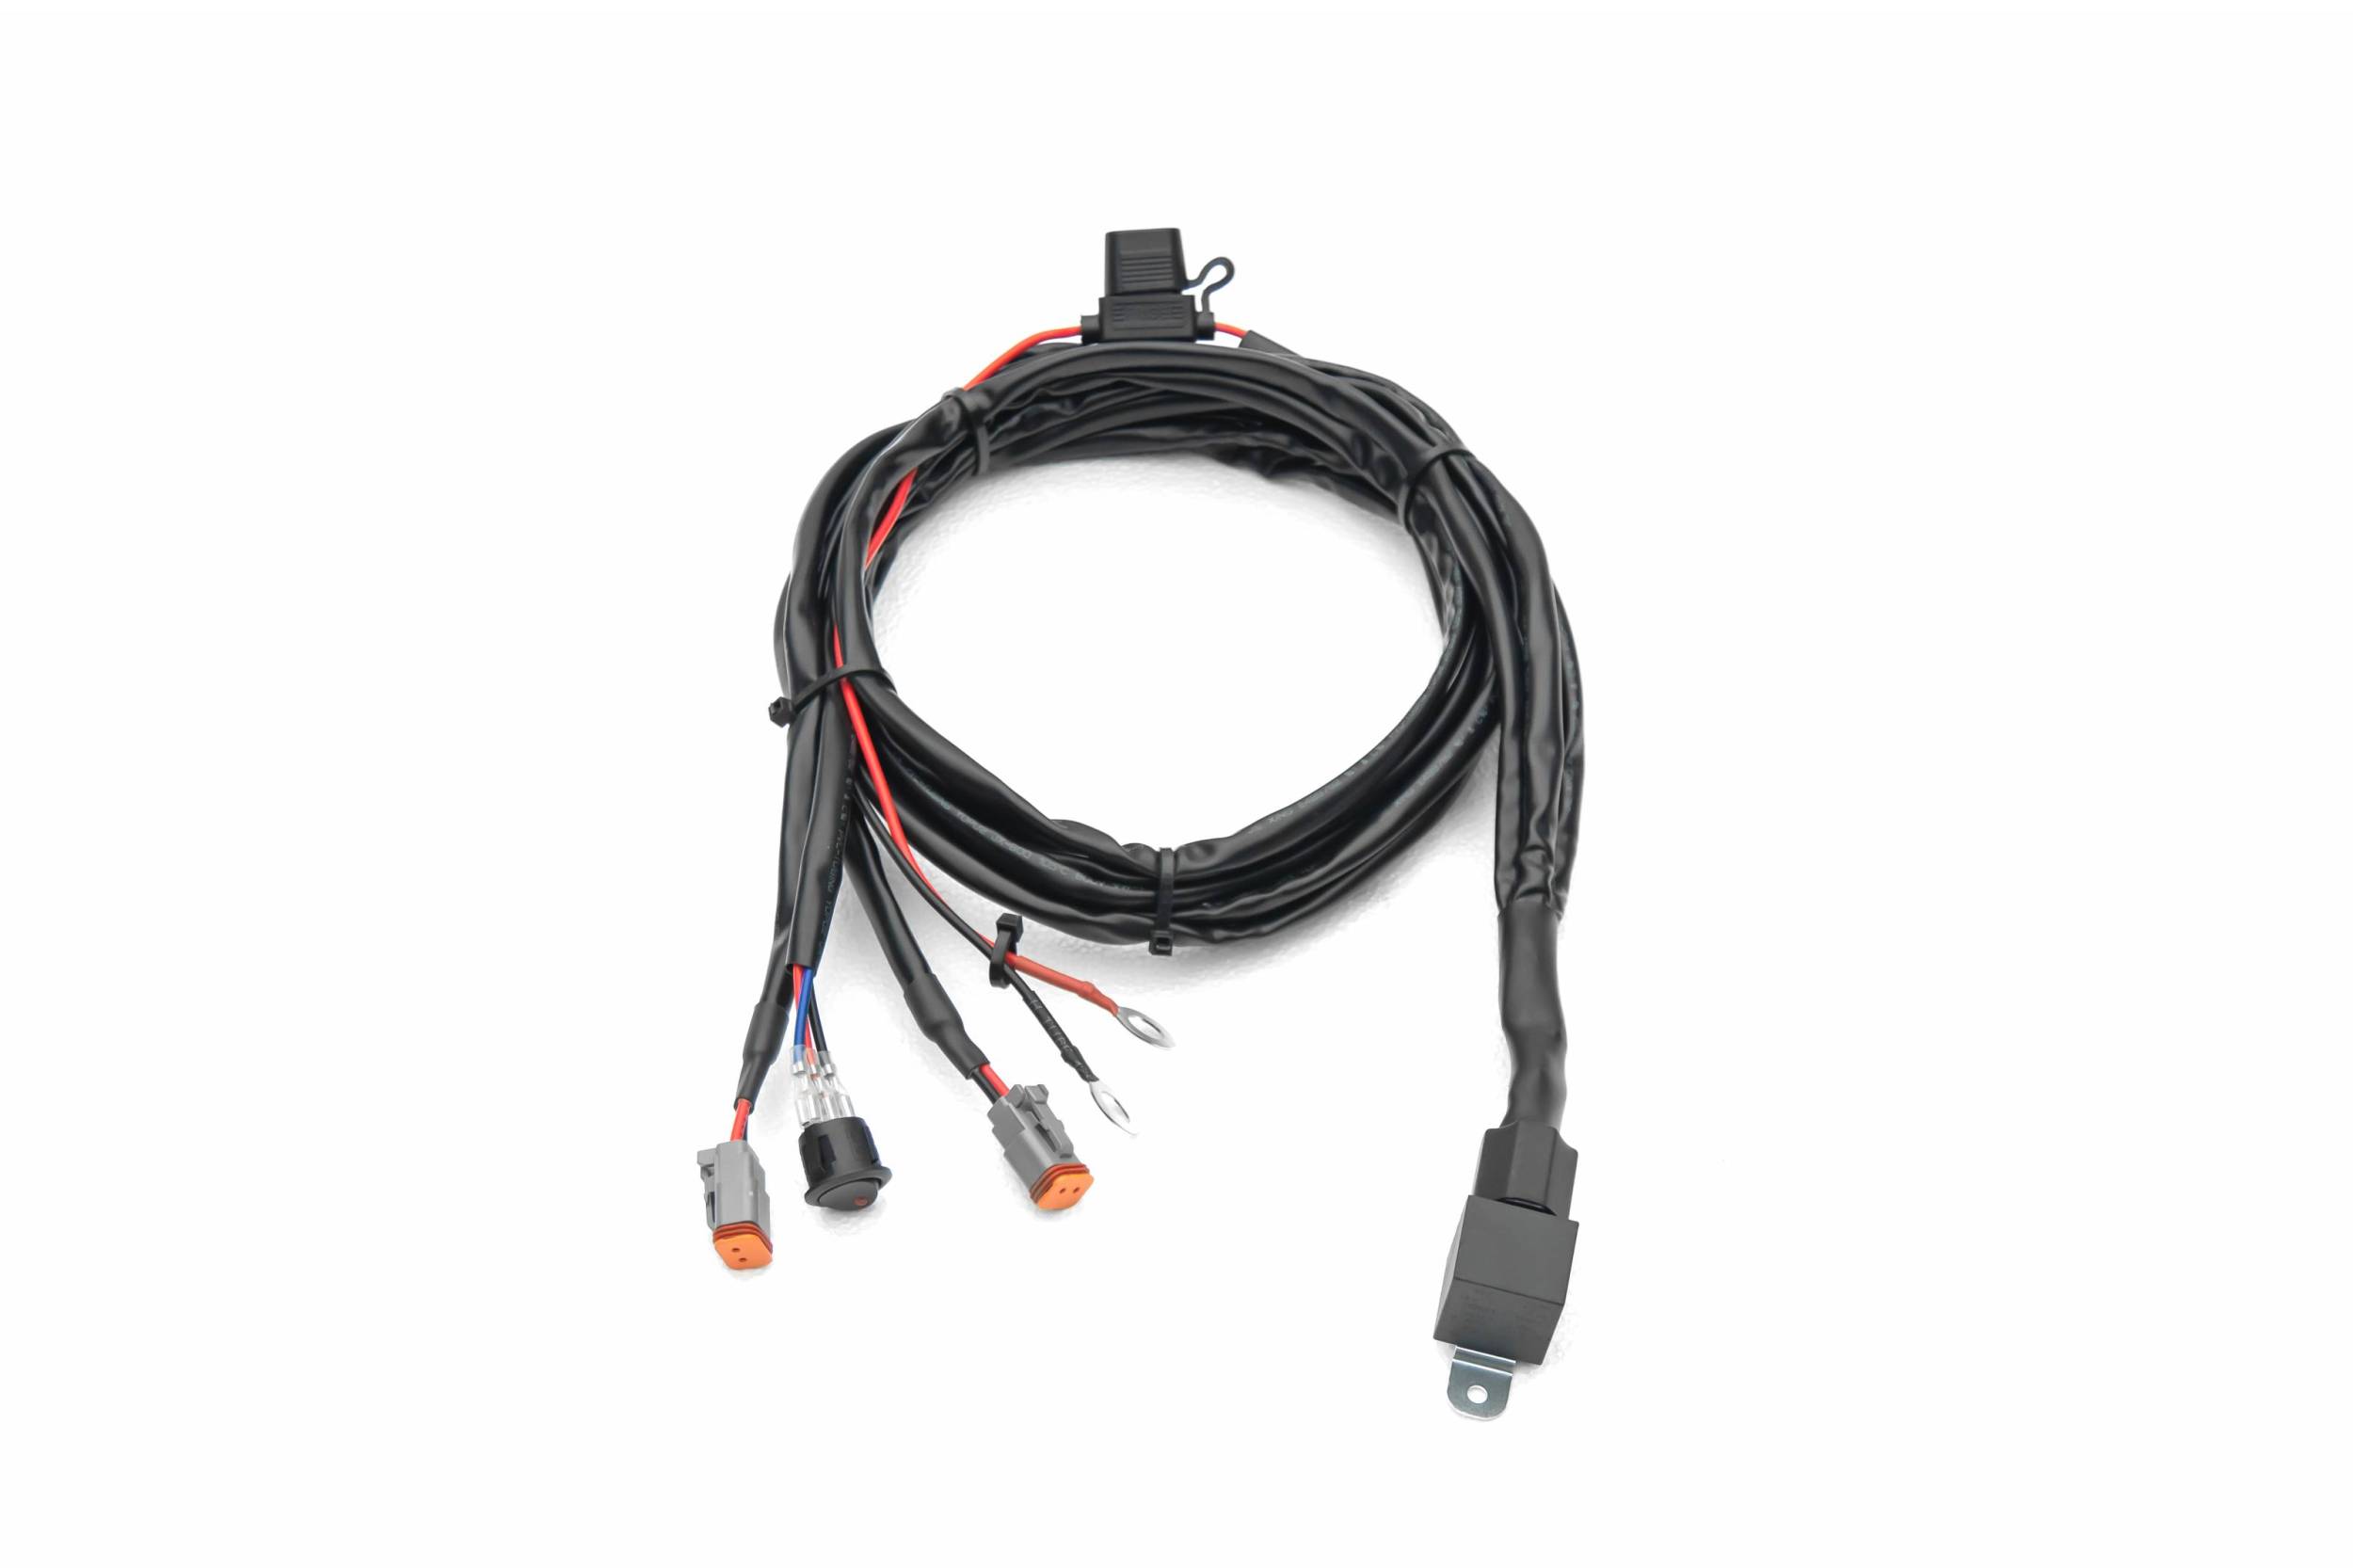 ZROADZ OFF ROAD PRODUCTS Z390020D-A Universal 9 Ft DT Wiring Harness to connect 2 Light Bars, 200 Wa